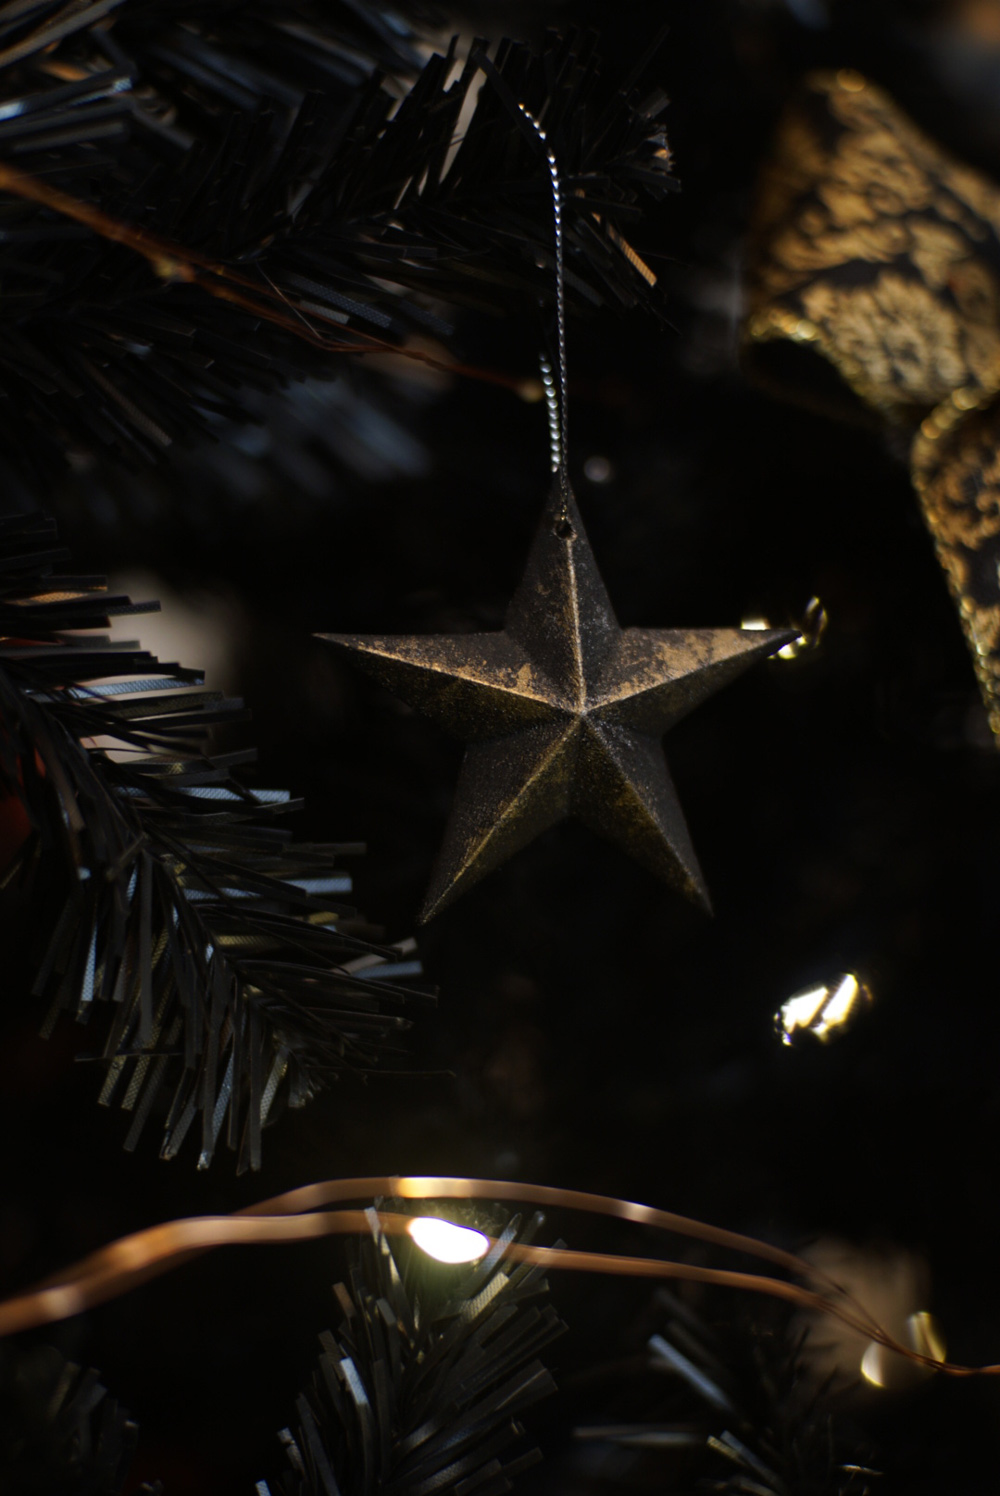 Close-up of a dark star ornament hanging on a black Christmas tree with lights.